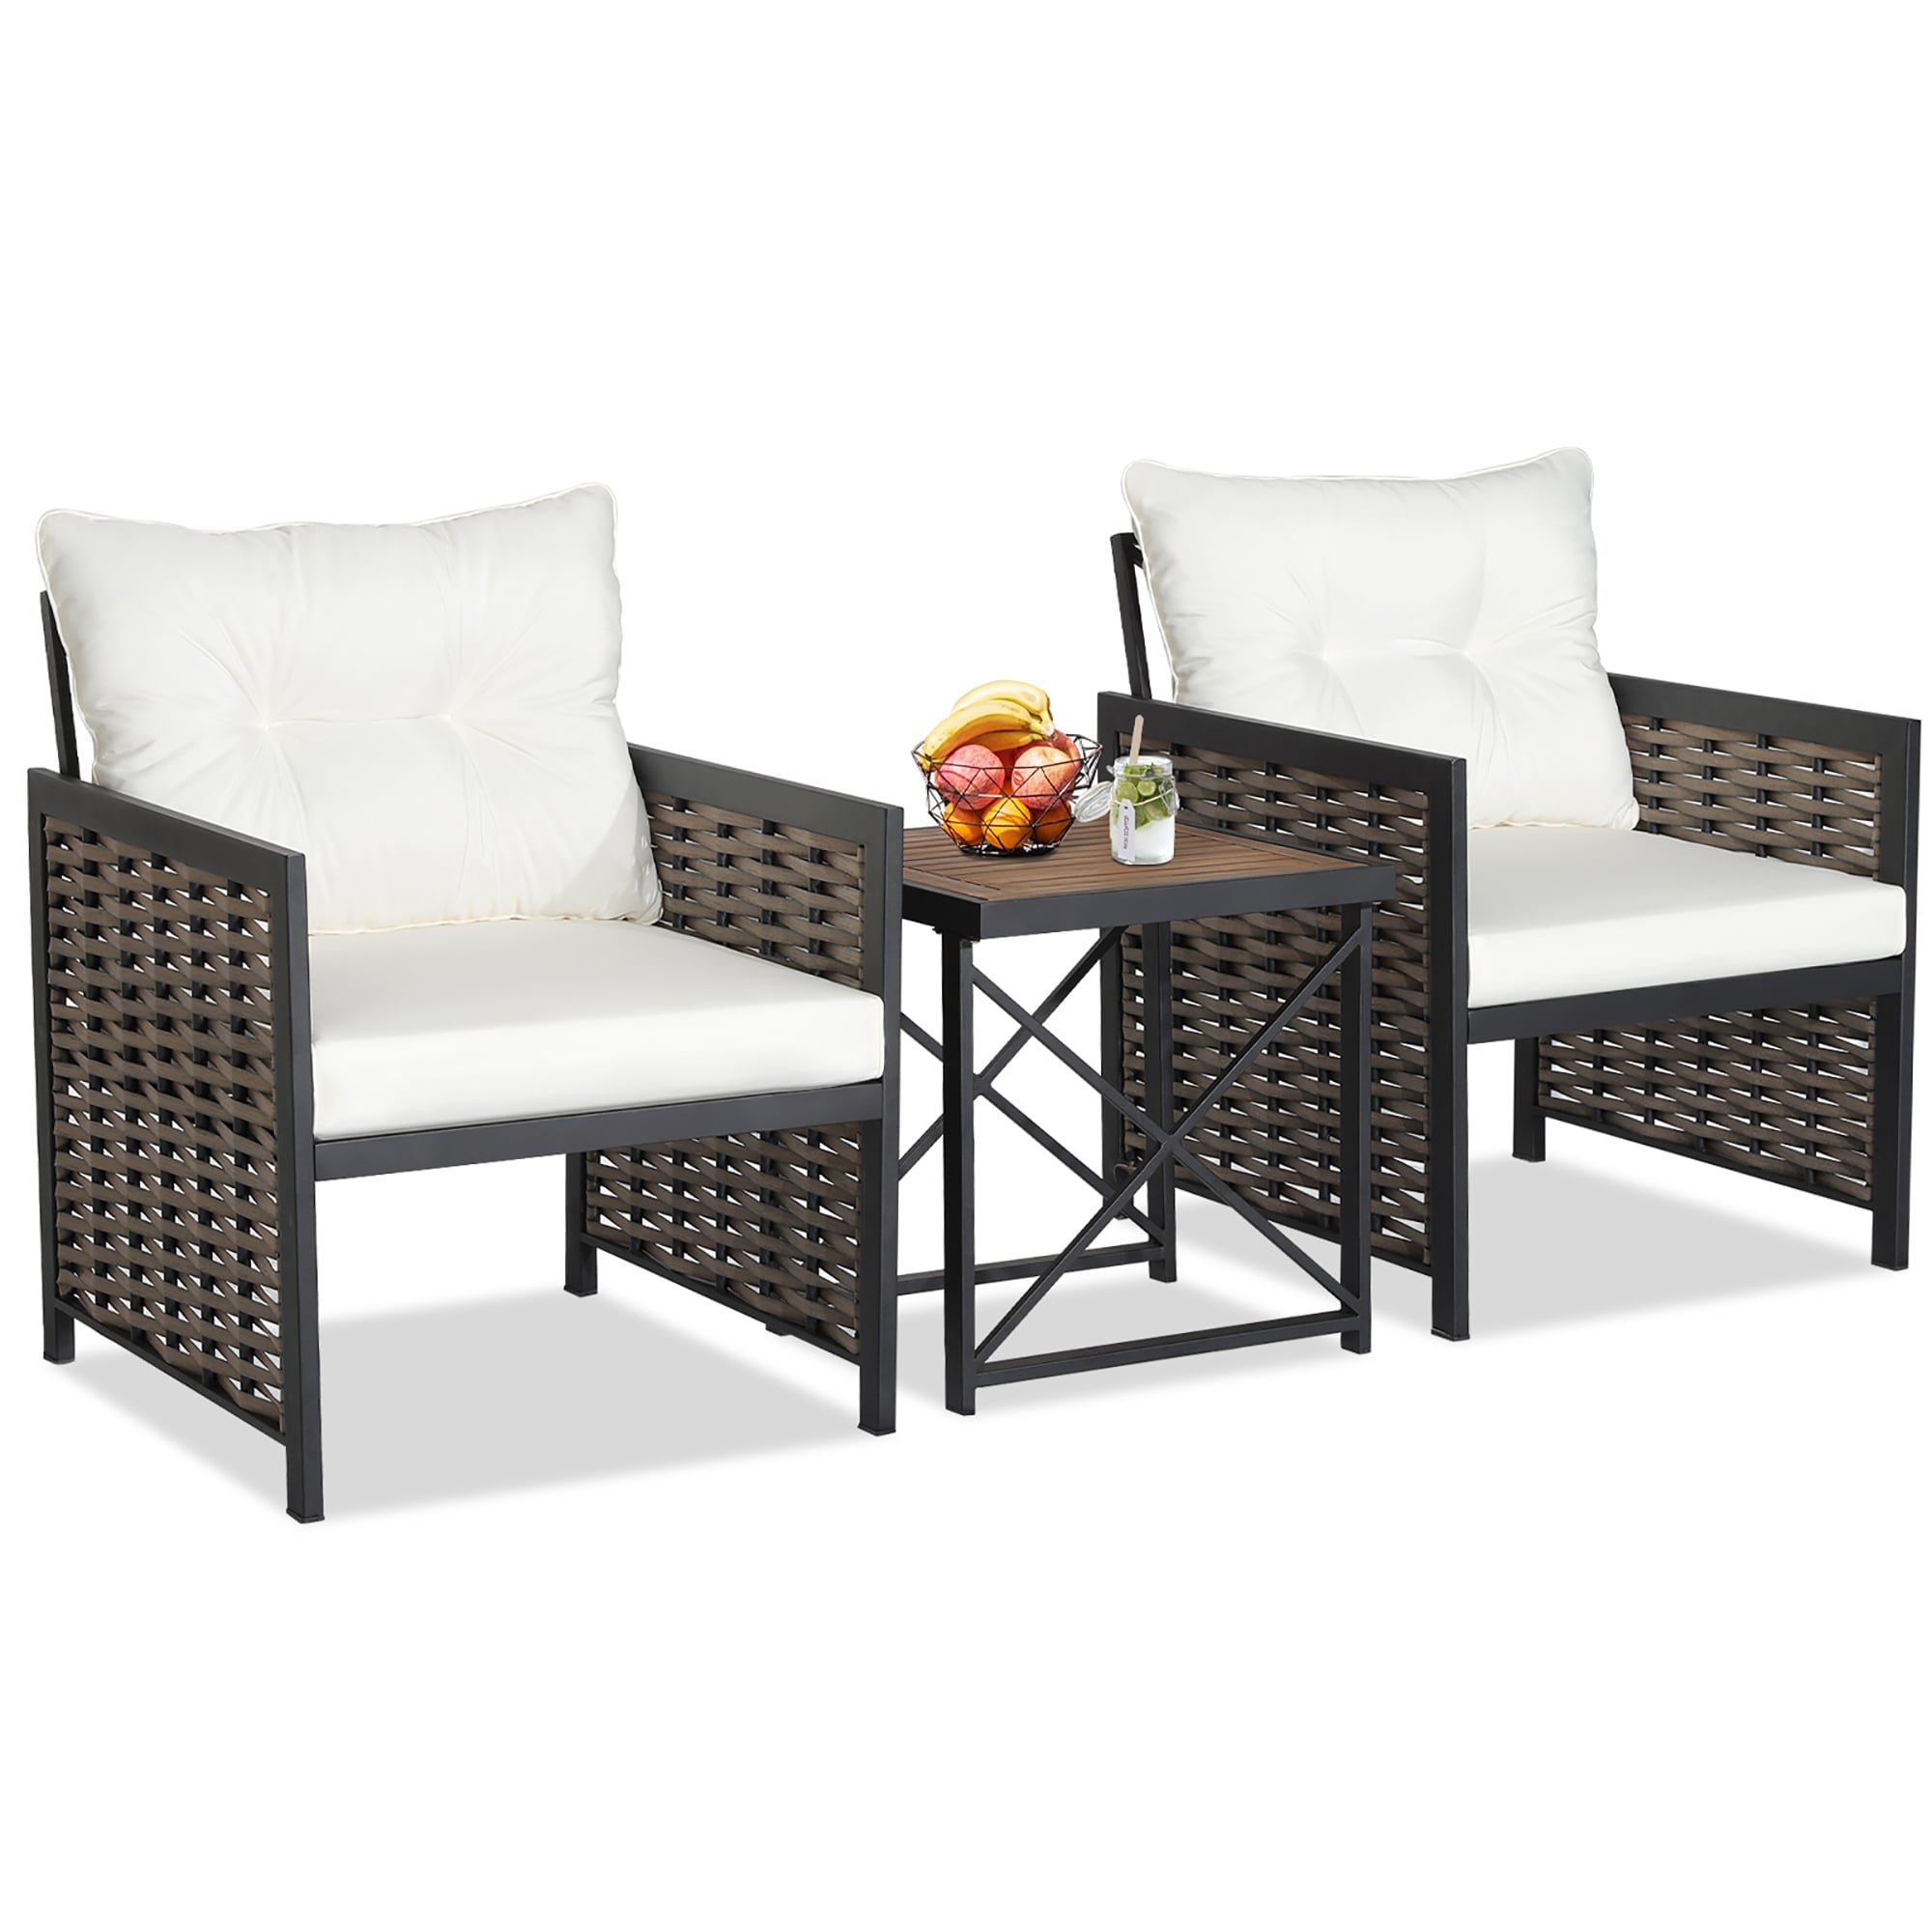 3 Pcs Patio Rattan Furniture Set Acacia Wood Coffee Table and 2 Chairs